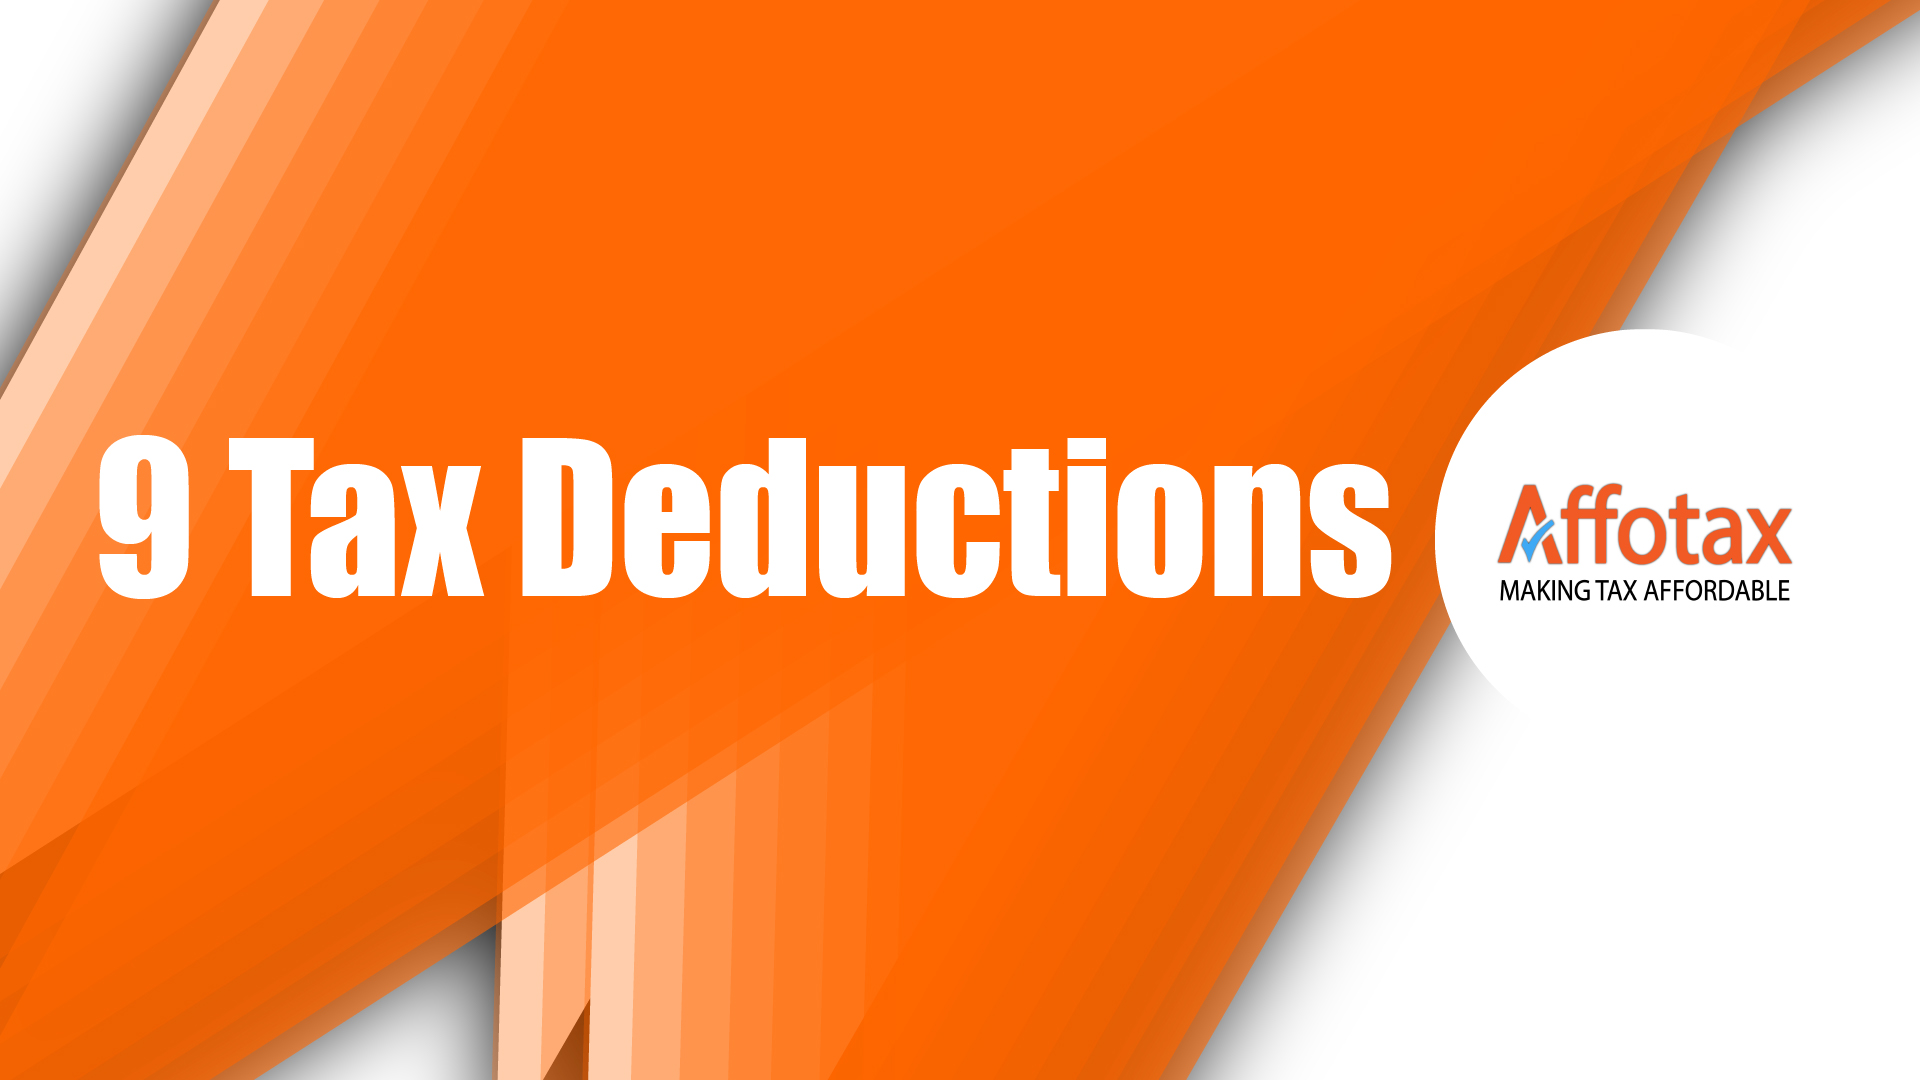 9 Little-Known Tax Deductions Every Business Owner Should Know About